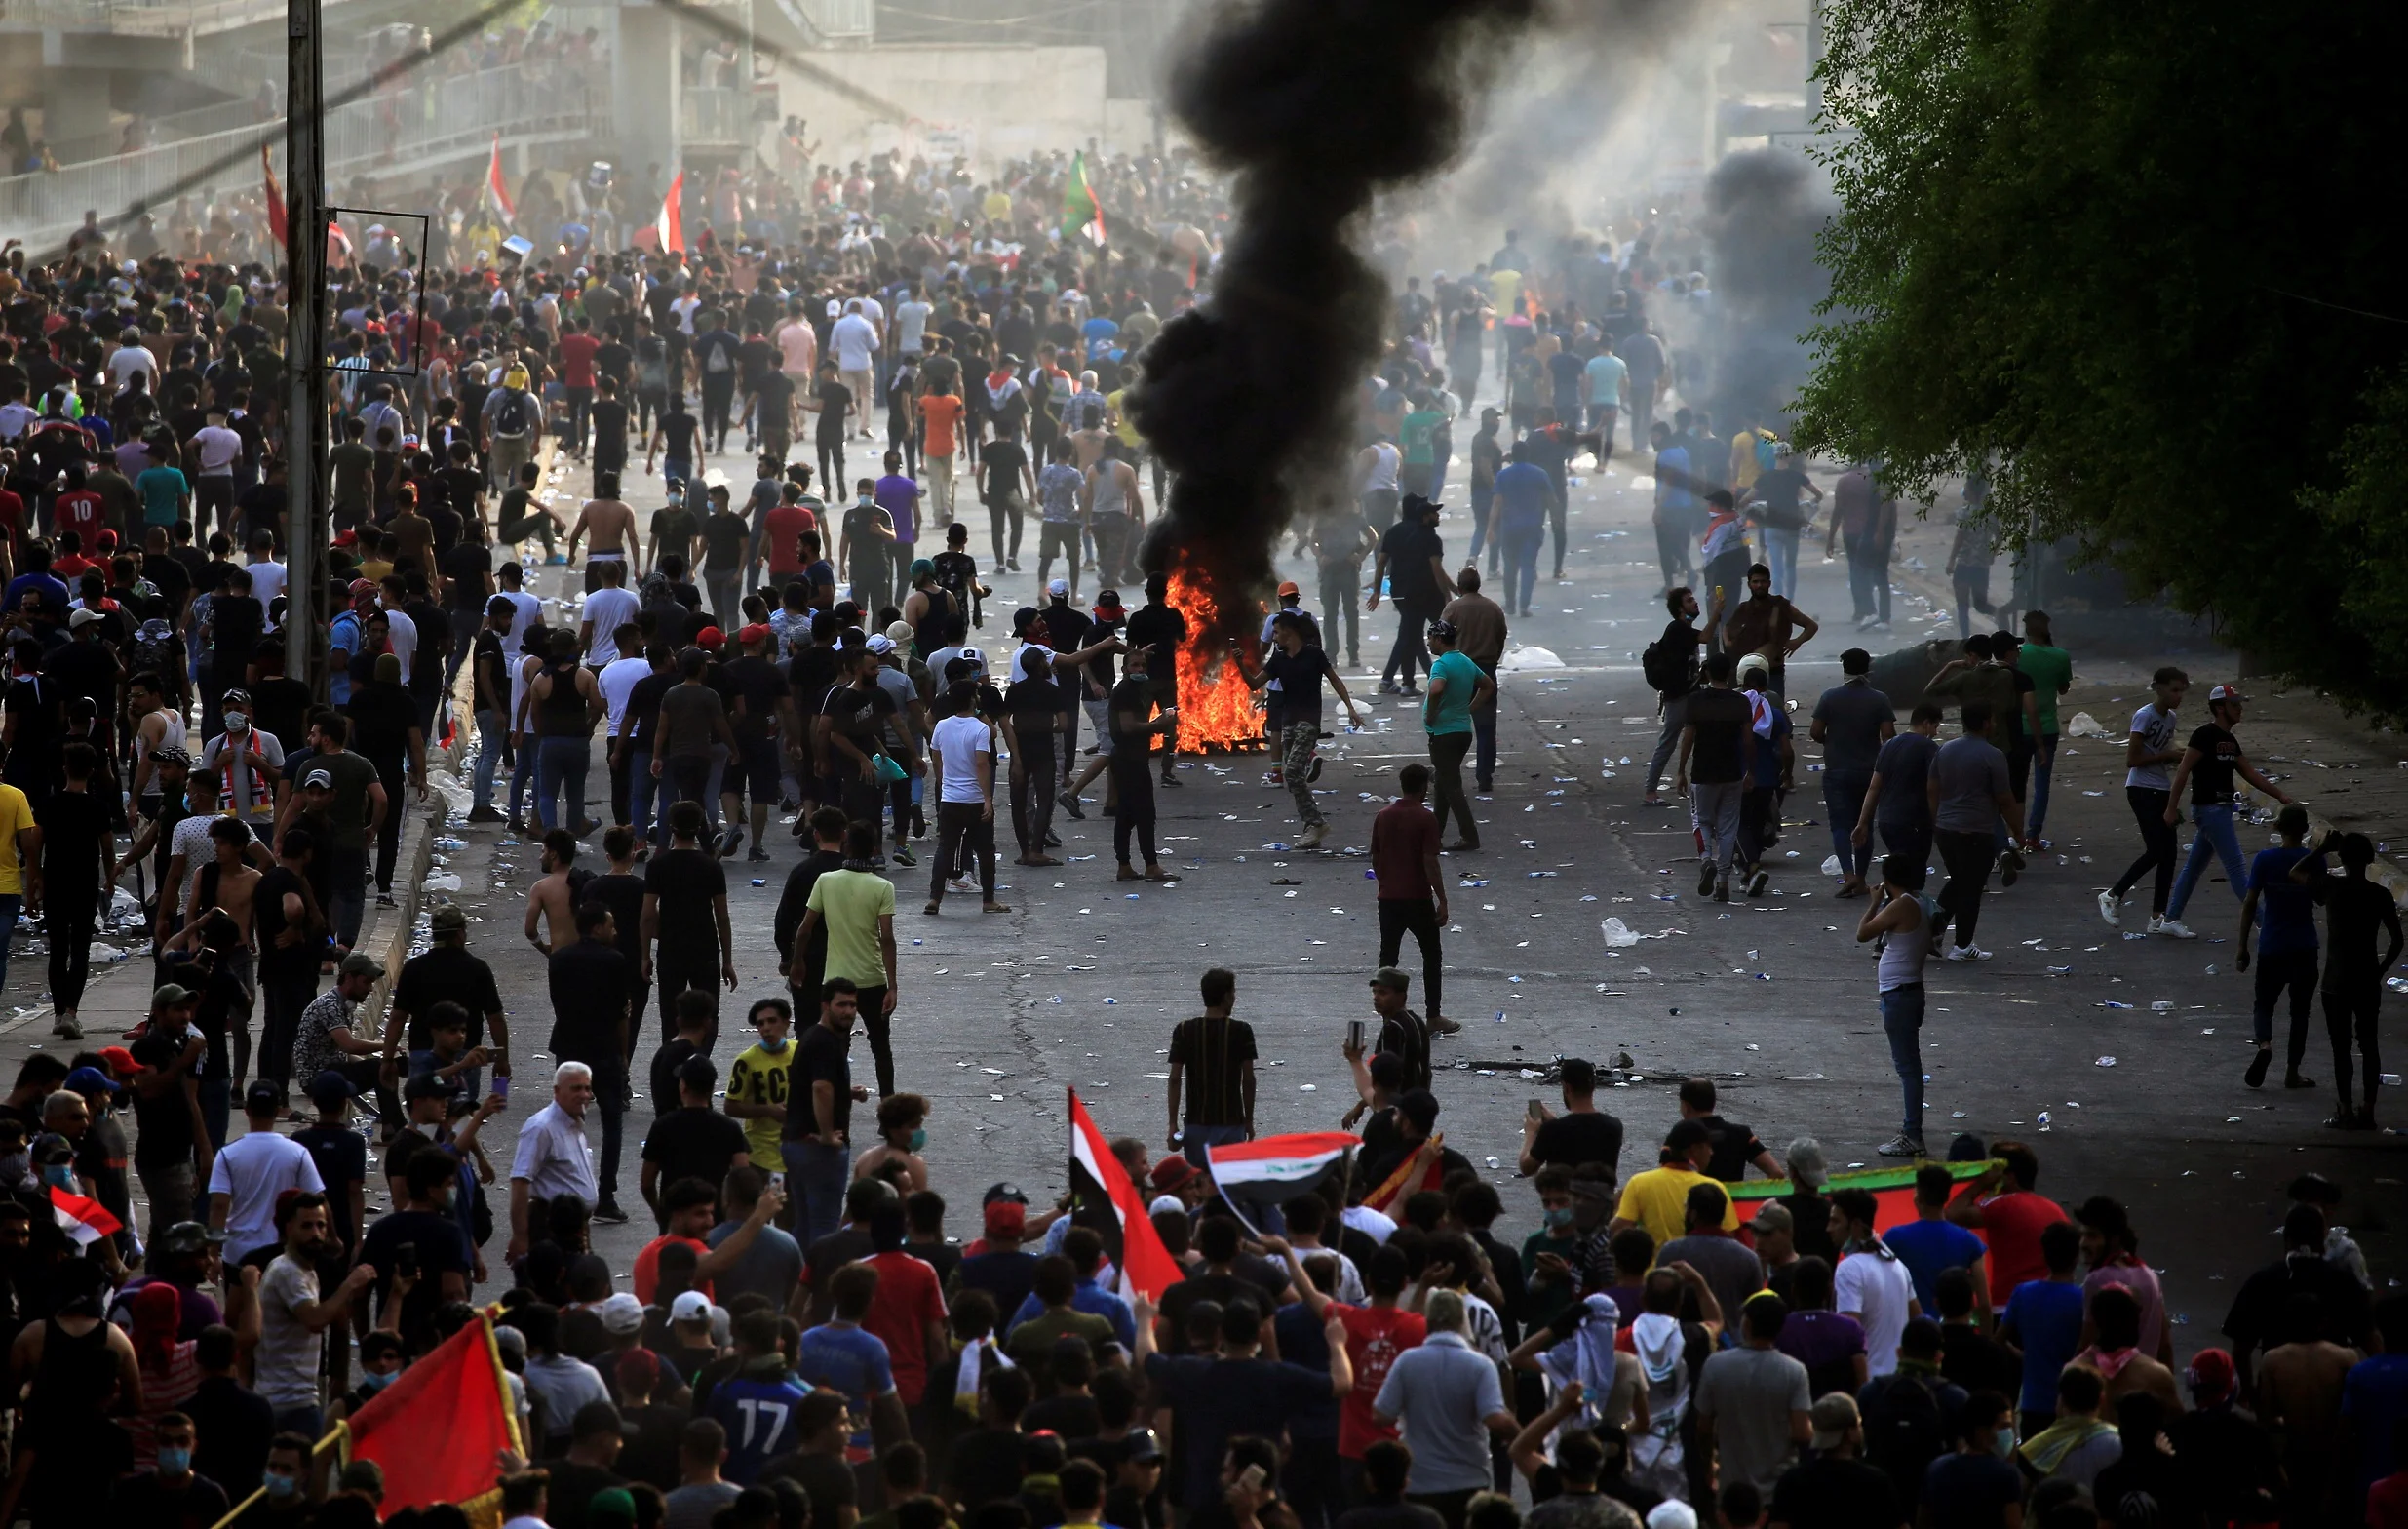 Demonstrators Gather As They Take Part In A Protest Over Unemployment, Corruption And Poor Public Services, In Baghdad